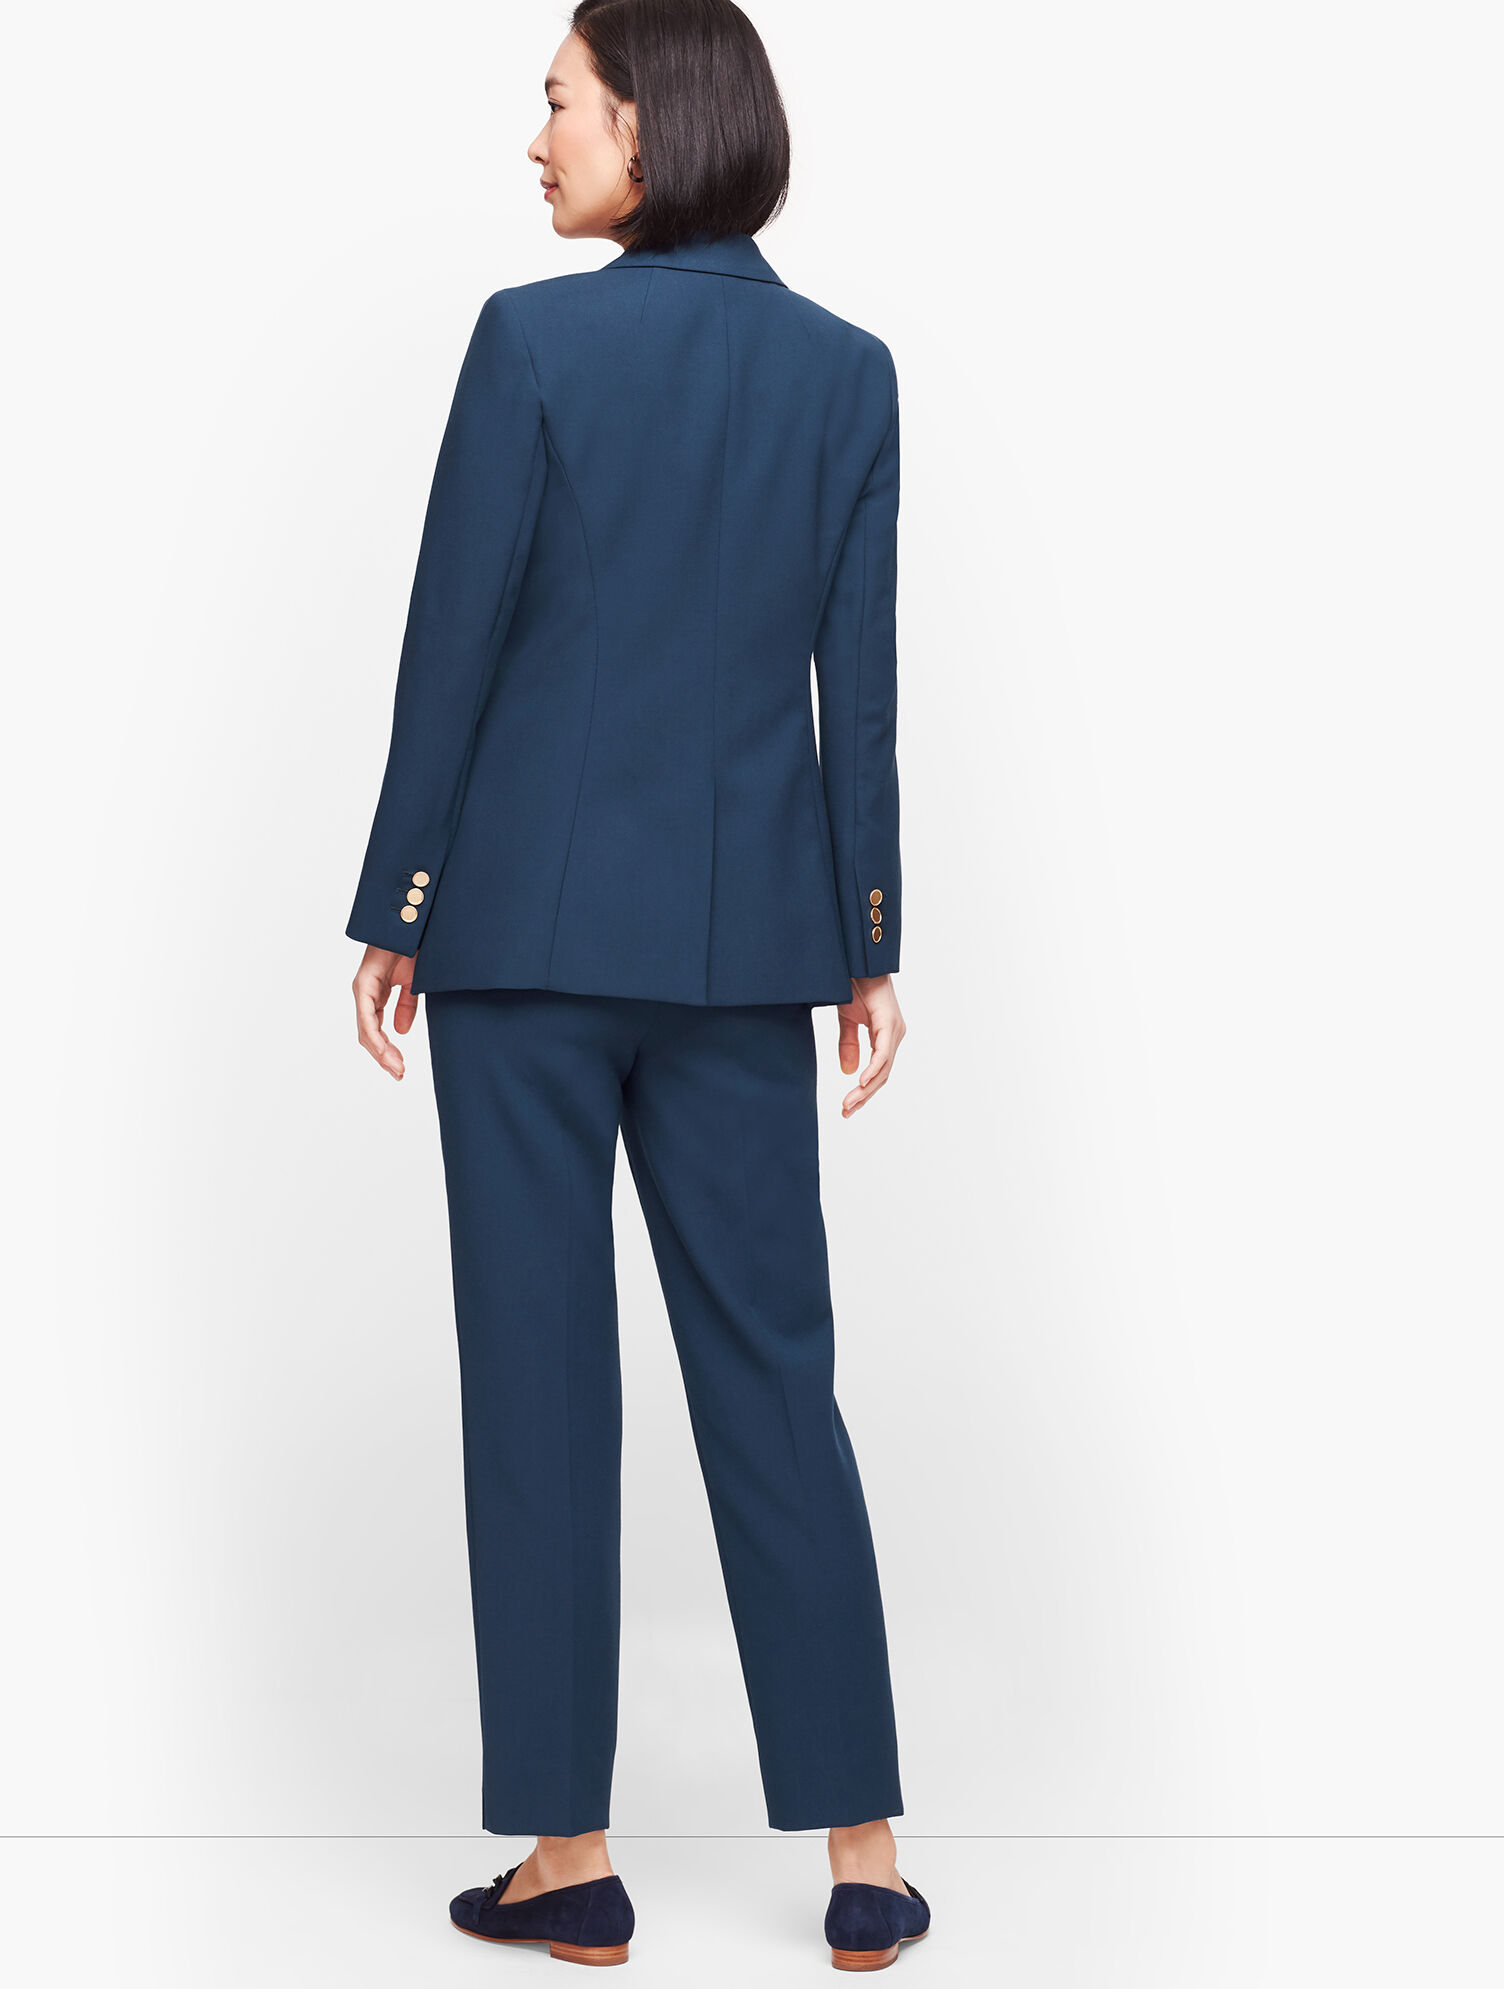 Single-Button Blazer and Slim-Fit Pantsuit, Regular and Petite Sizes